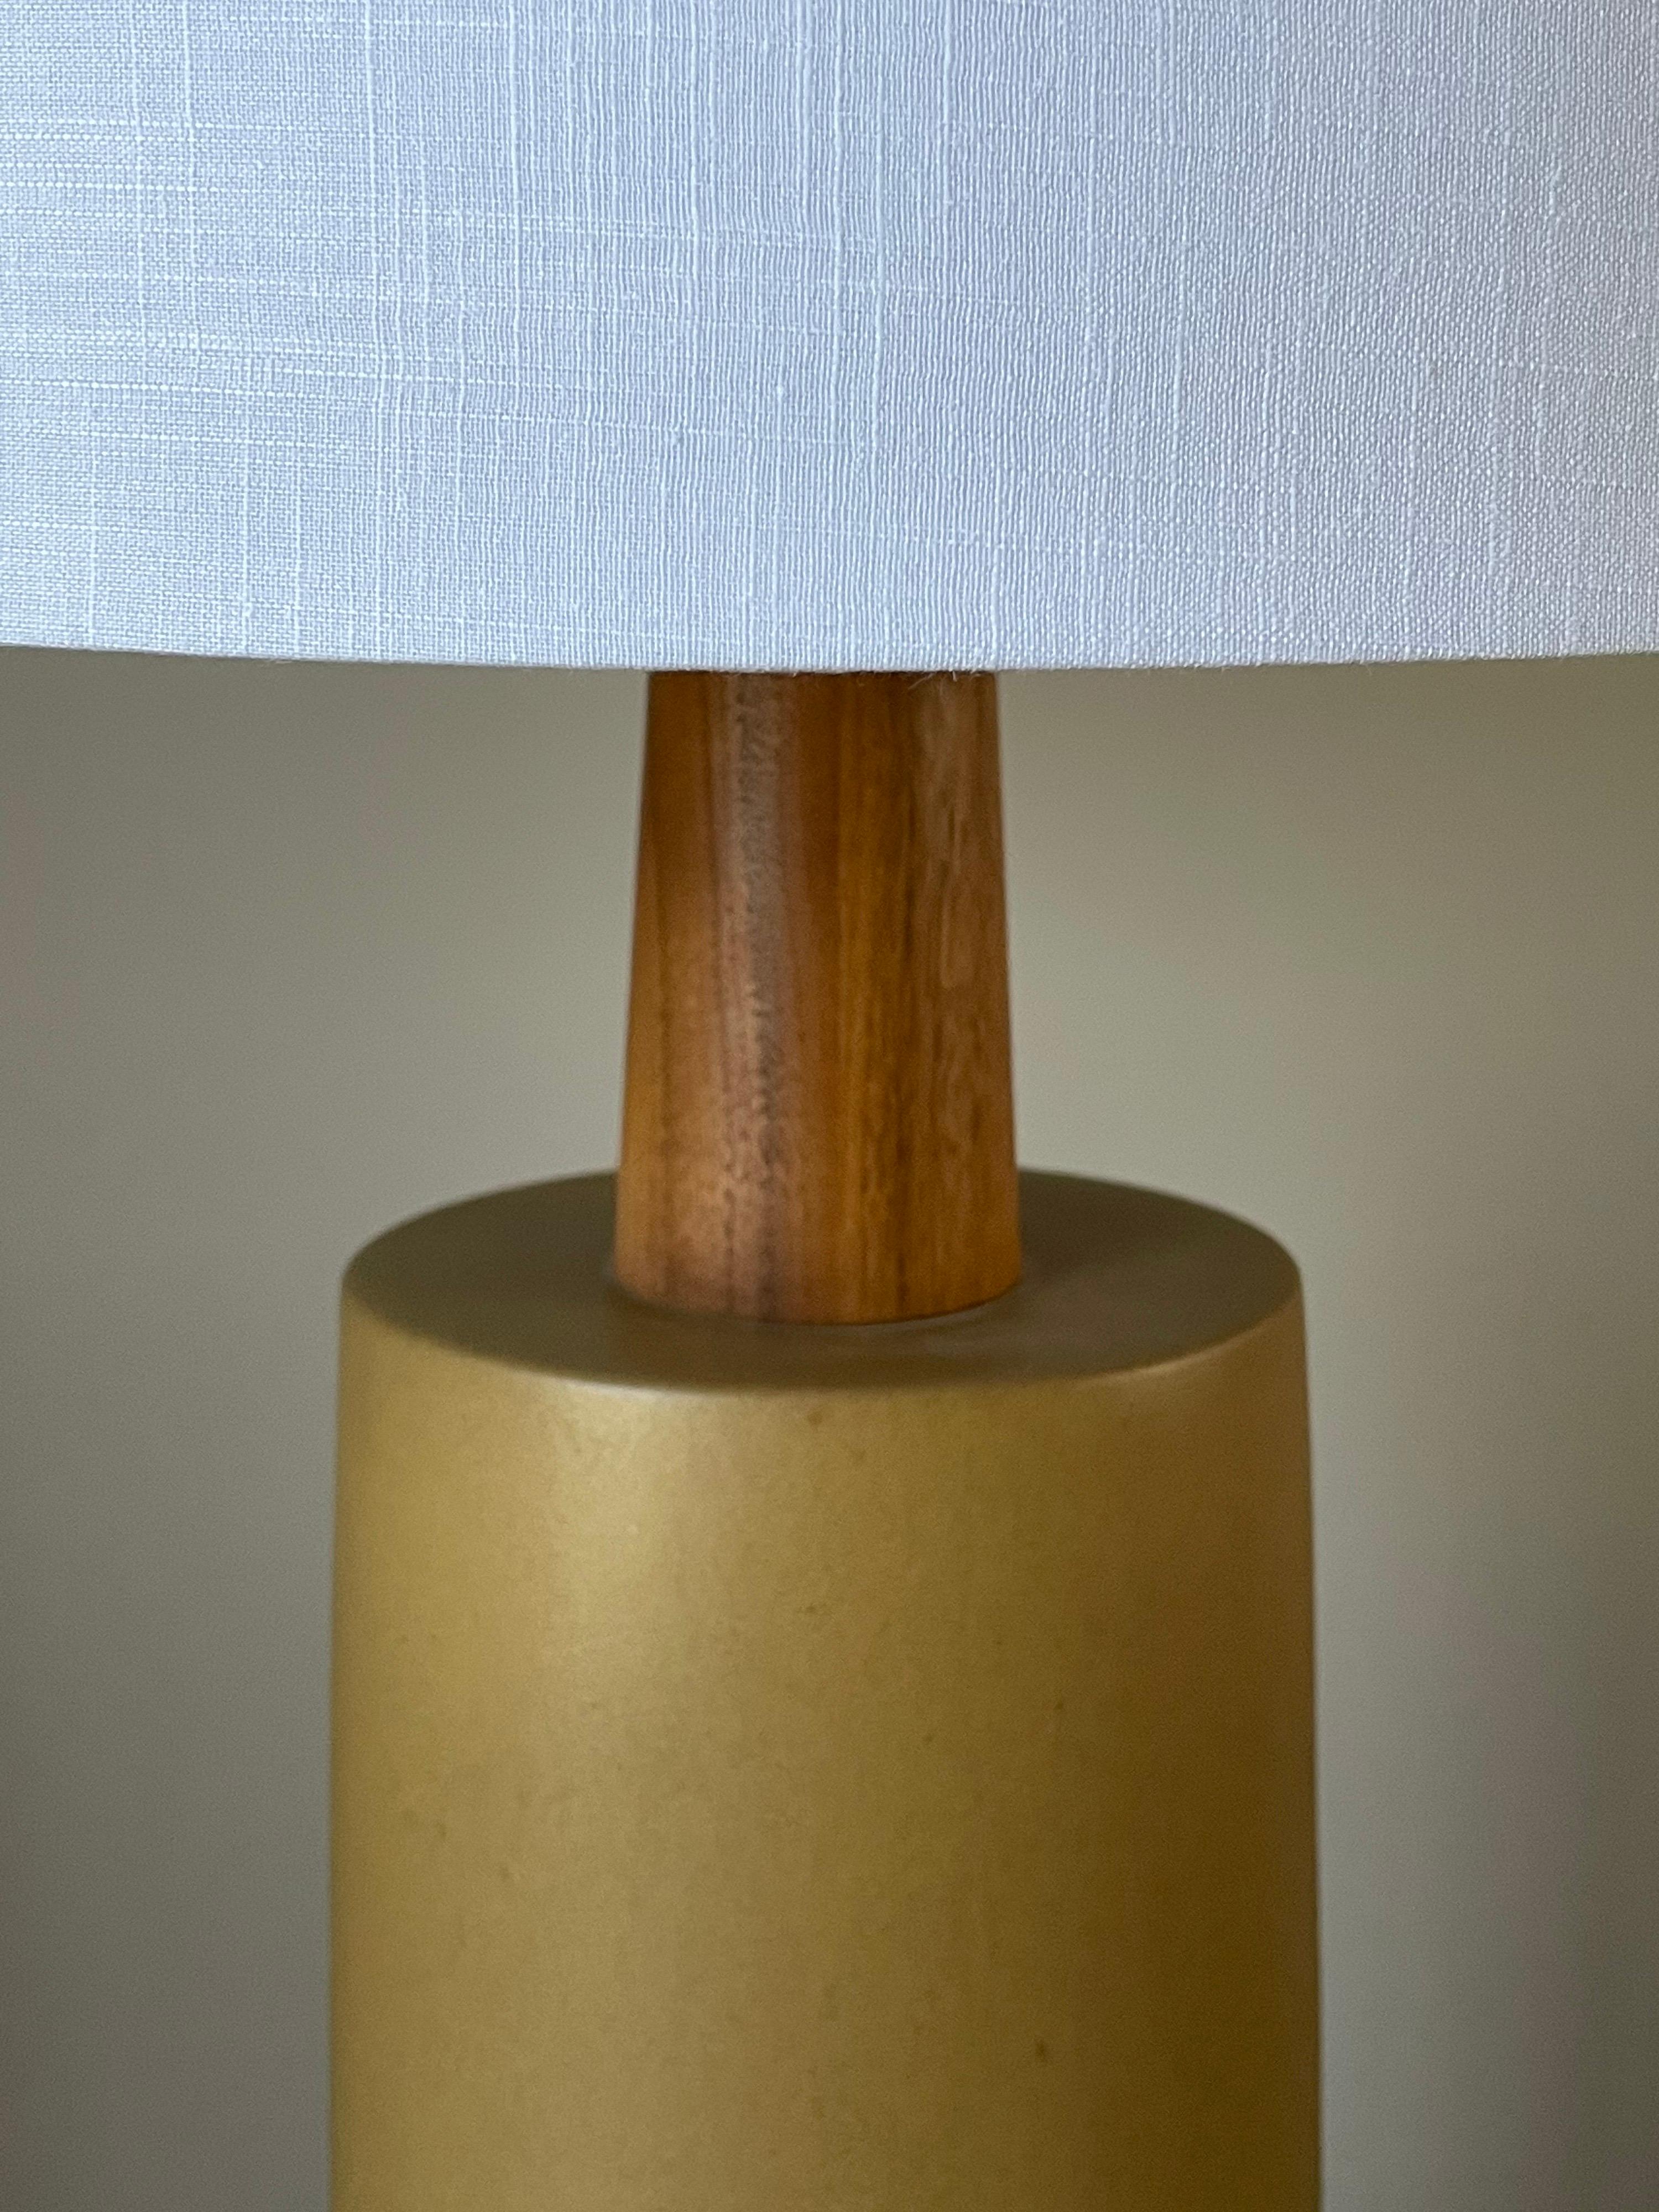 Very large Martz lamp by ceramicist duo Jane and Gordon Martz for Marshall Studios. Beautiful yellow/ ochre matte glaze.

Measures: Overall
34.5” tall
17” wide

Ceramic portion
19” tall
 7” wide.